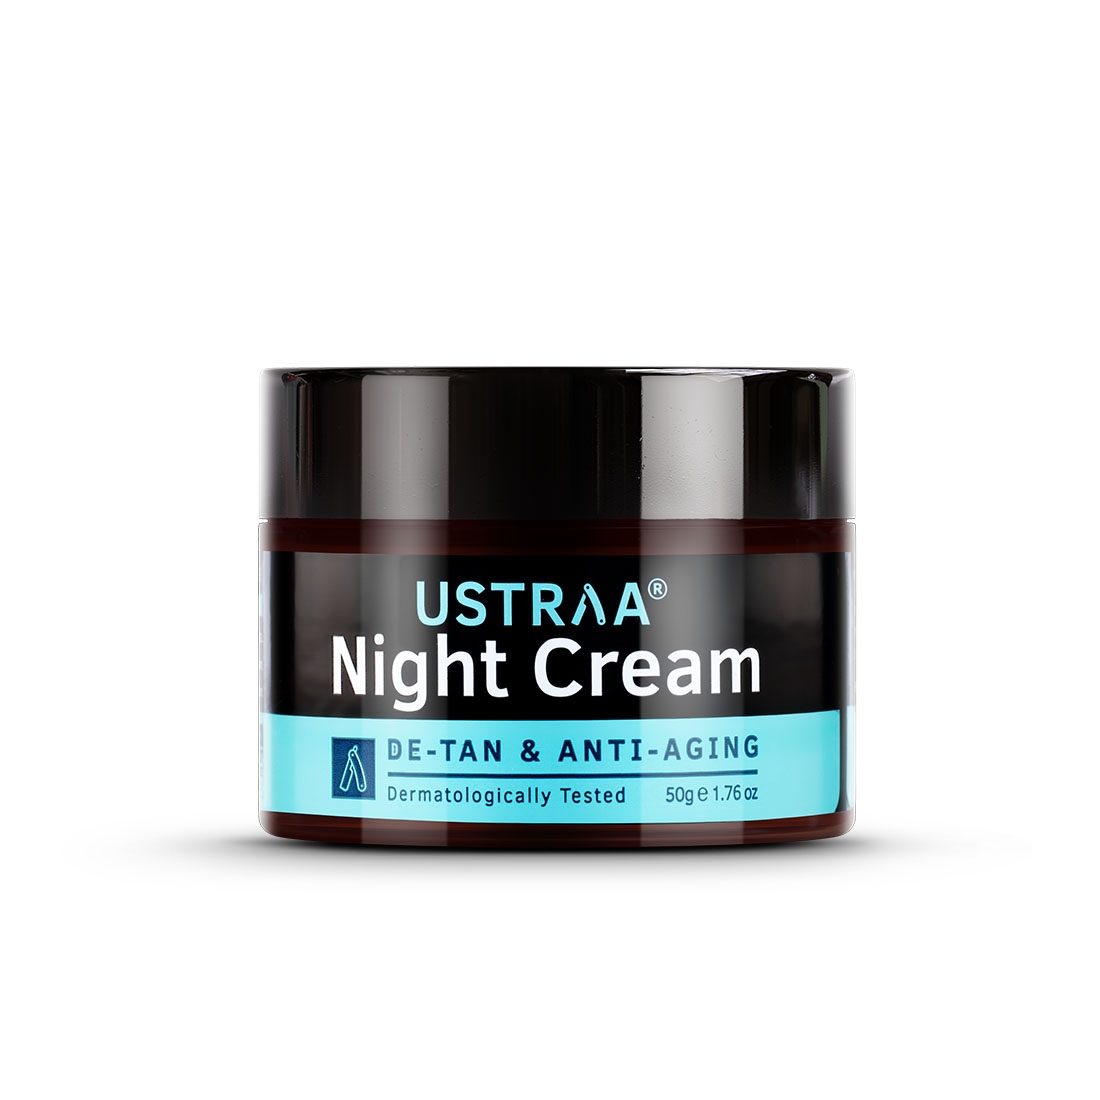 Ustraa | Ustraa Night Cream - 50g - De-Tan And Anti-Aging & Face Wash For Dry Skin-200g 1